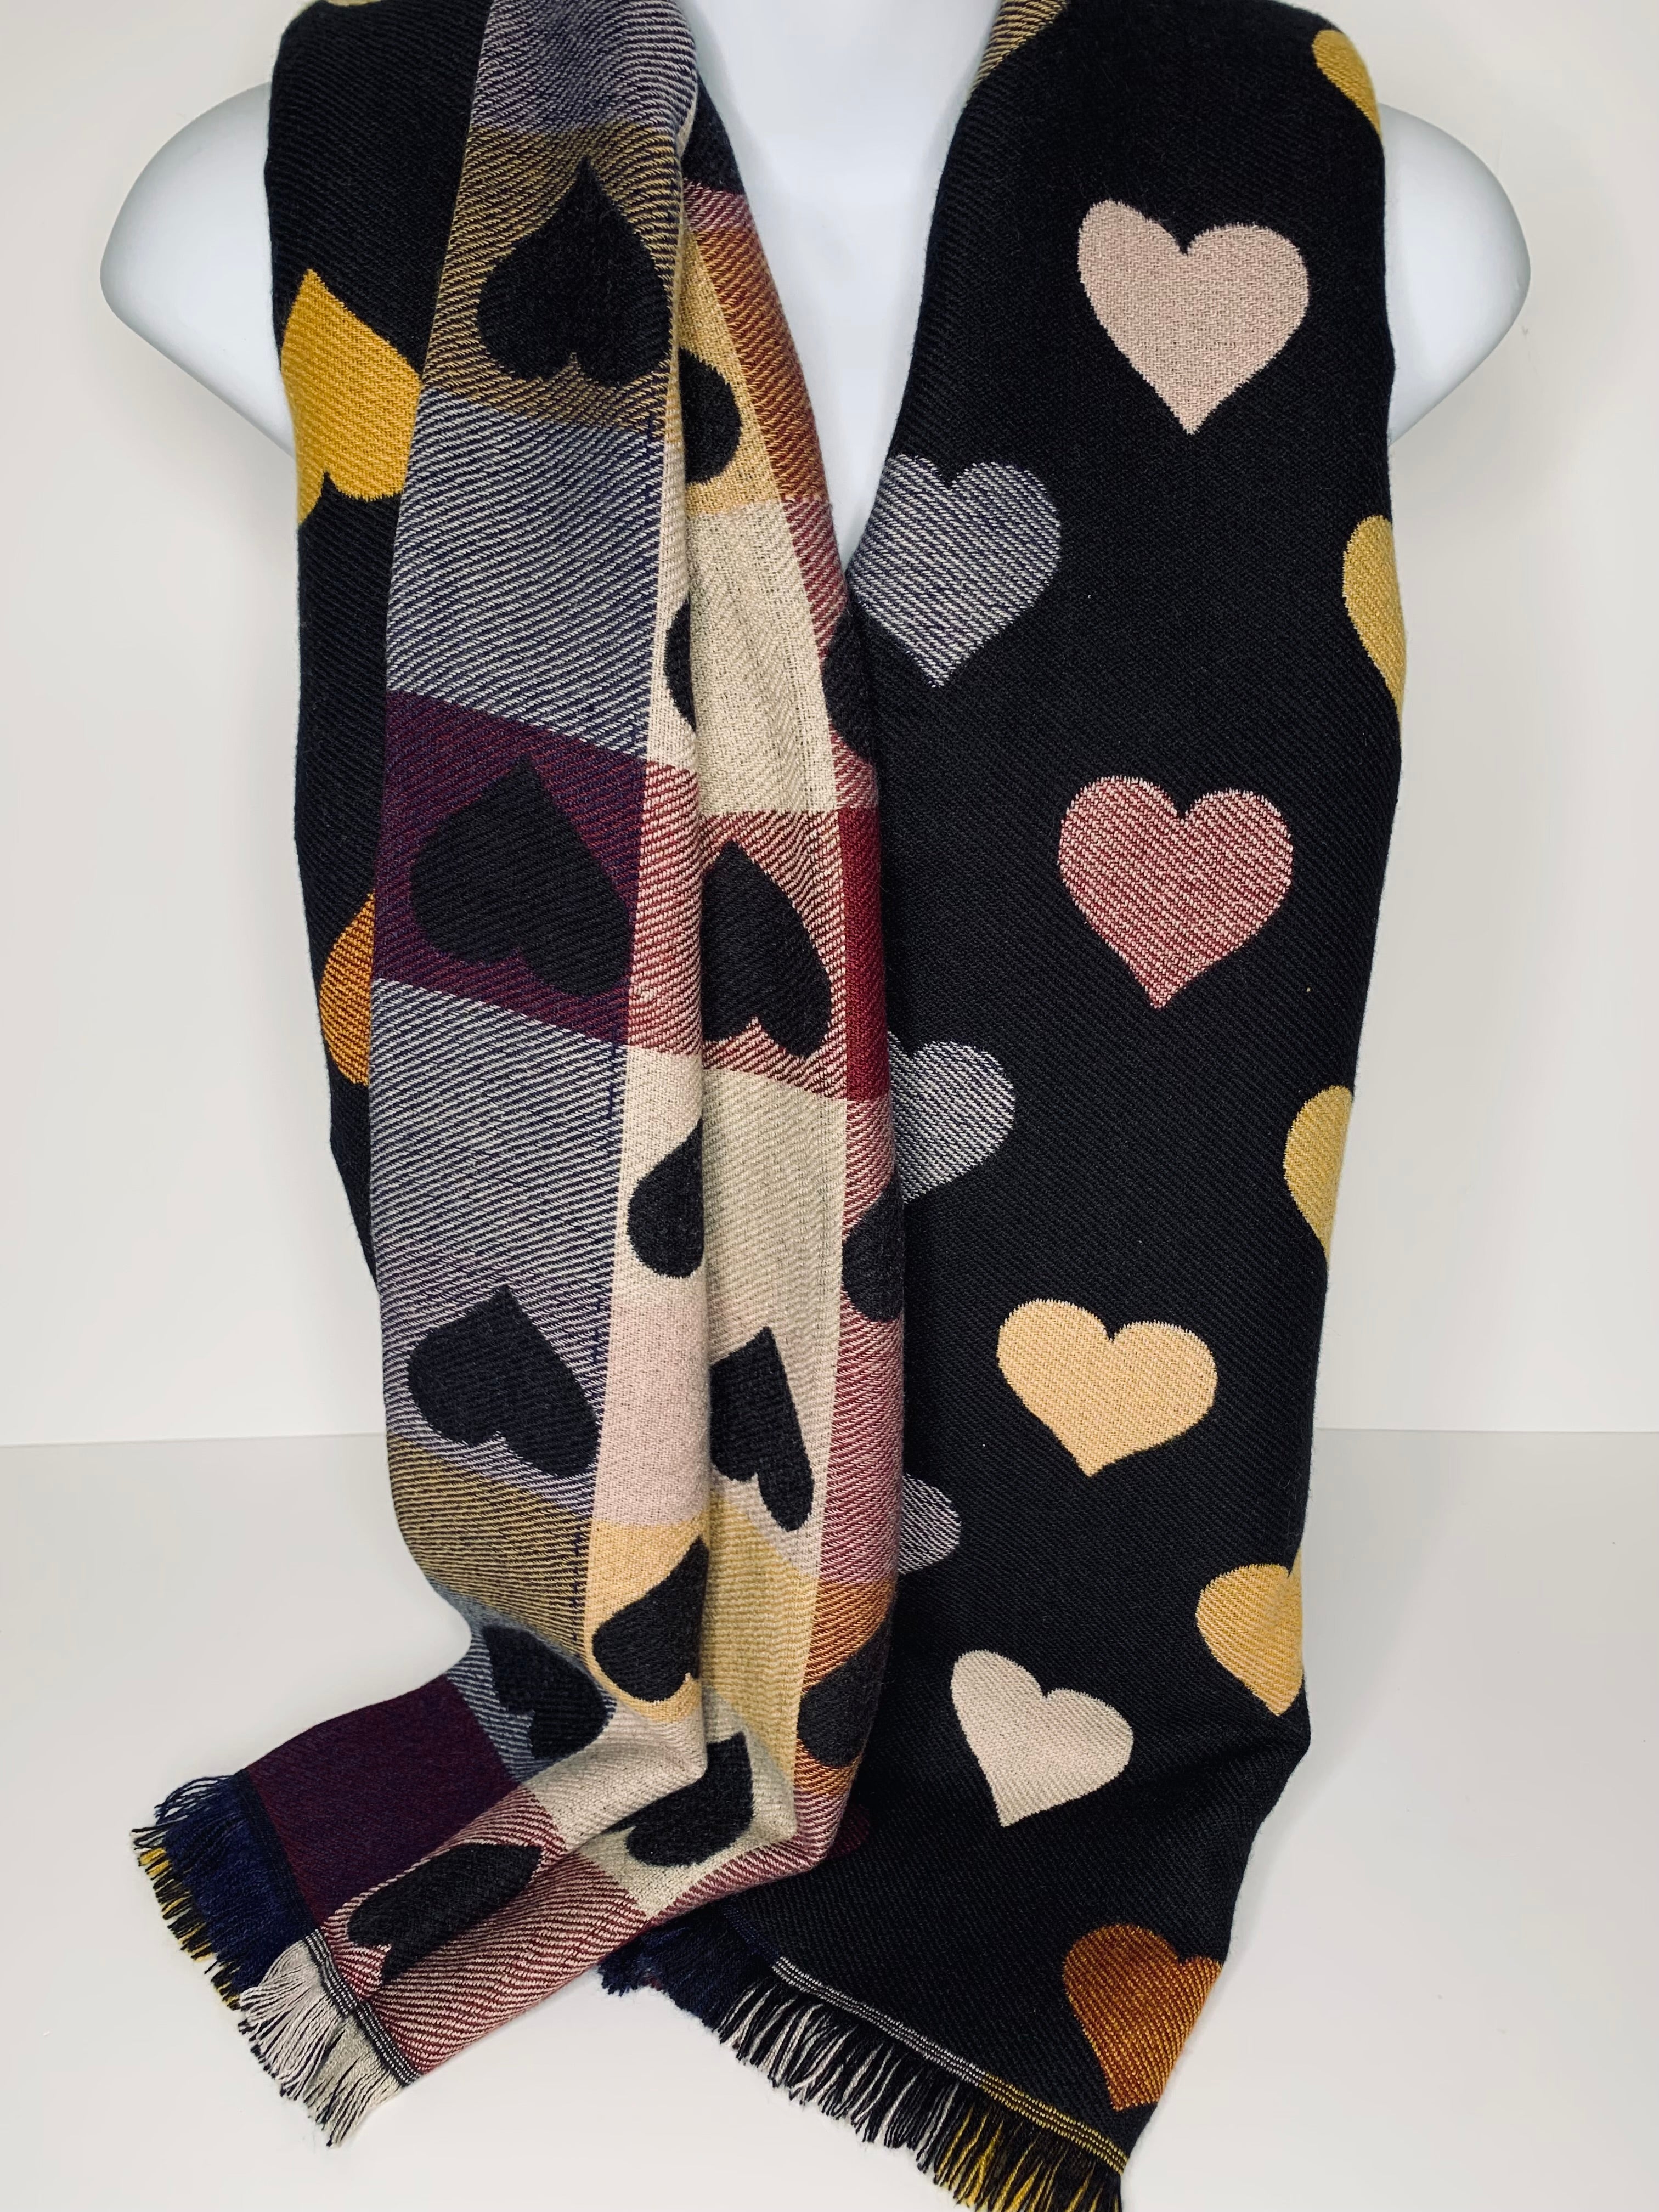 Reversible, cashmere-feel heart and tartan print scarf in black, mustard and burgundy